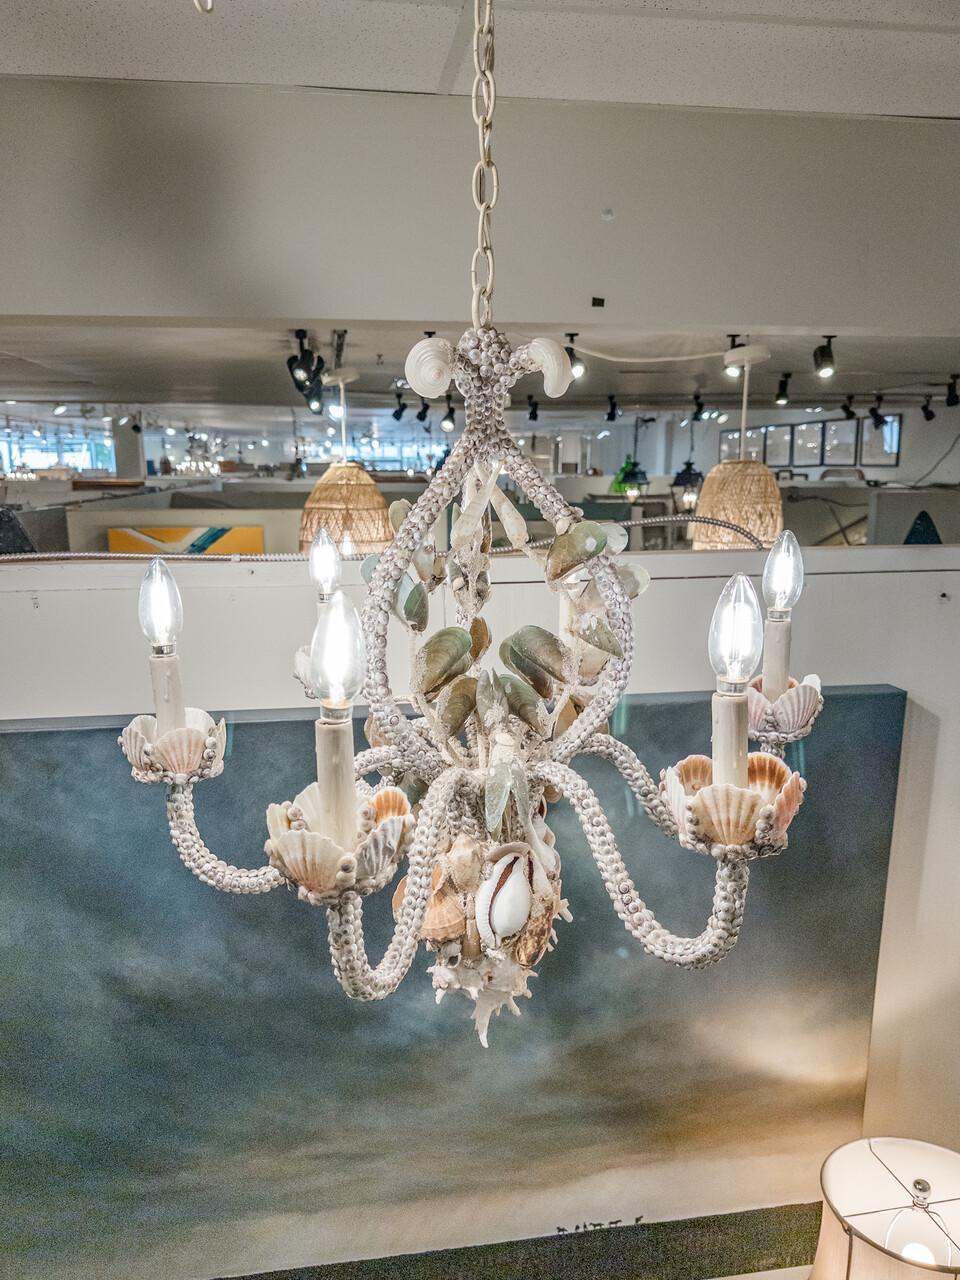 A unique custom made chandelier with meticulously applied seashells. A true work of art and a one of a kind!